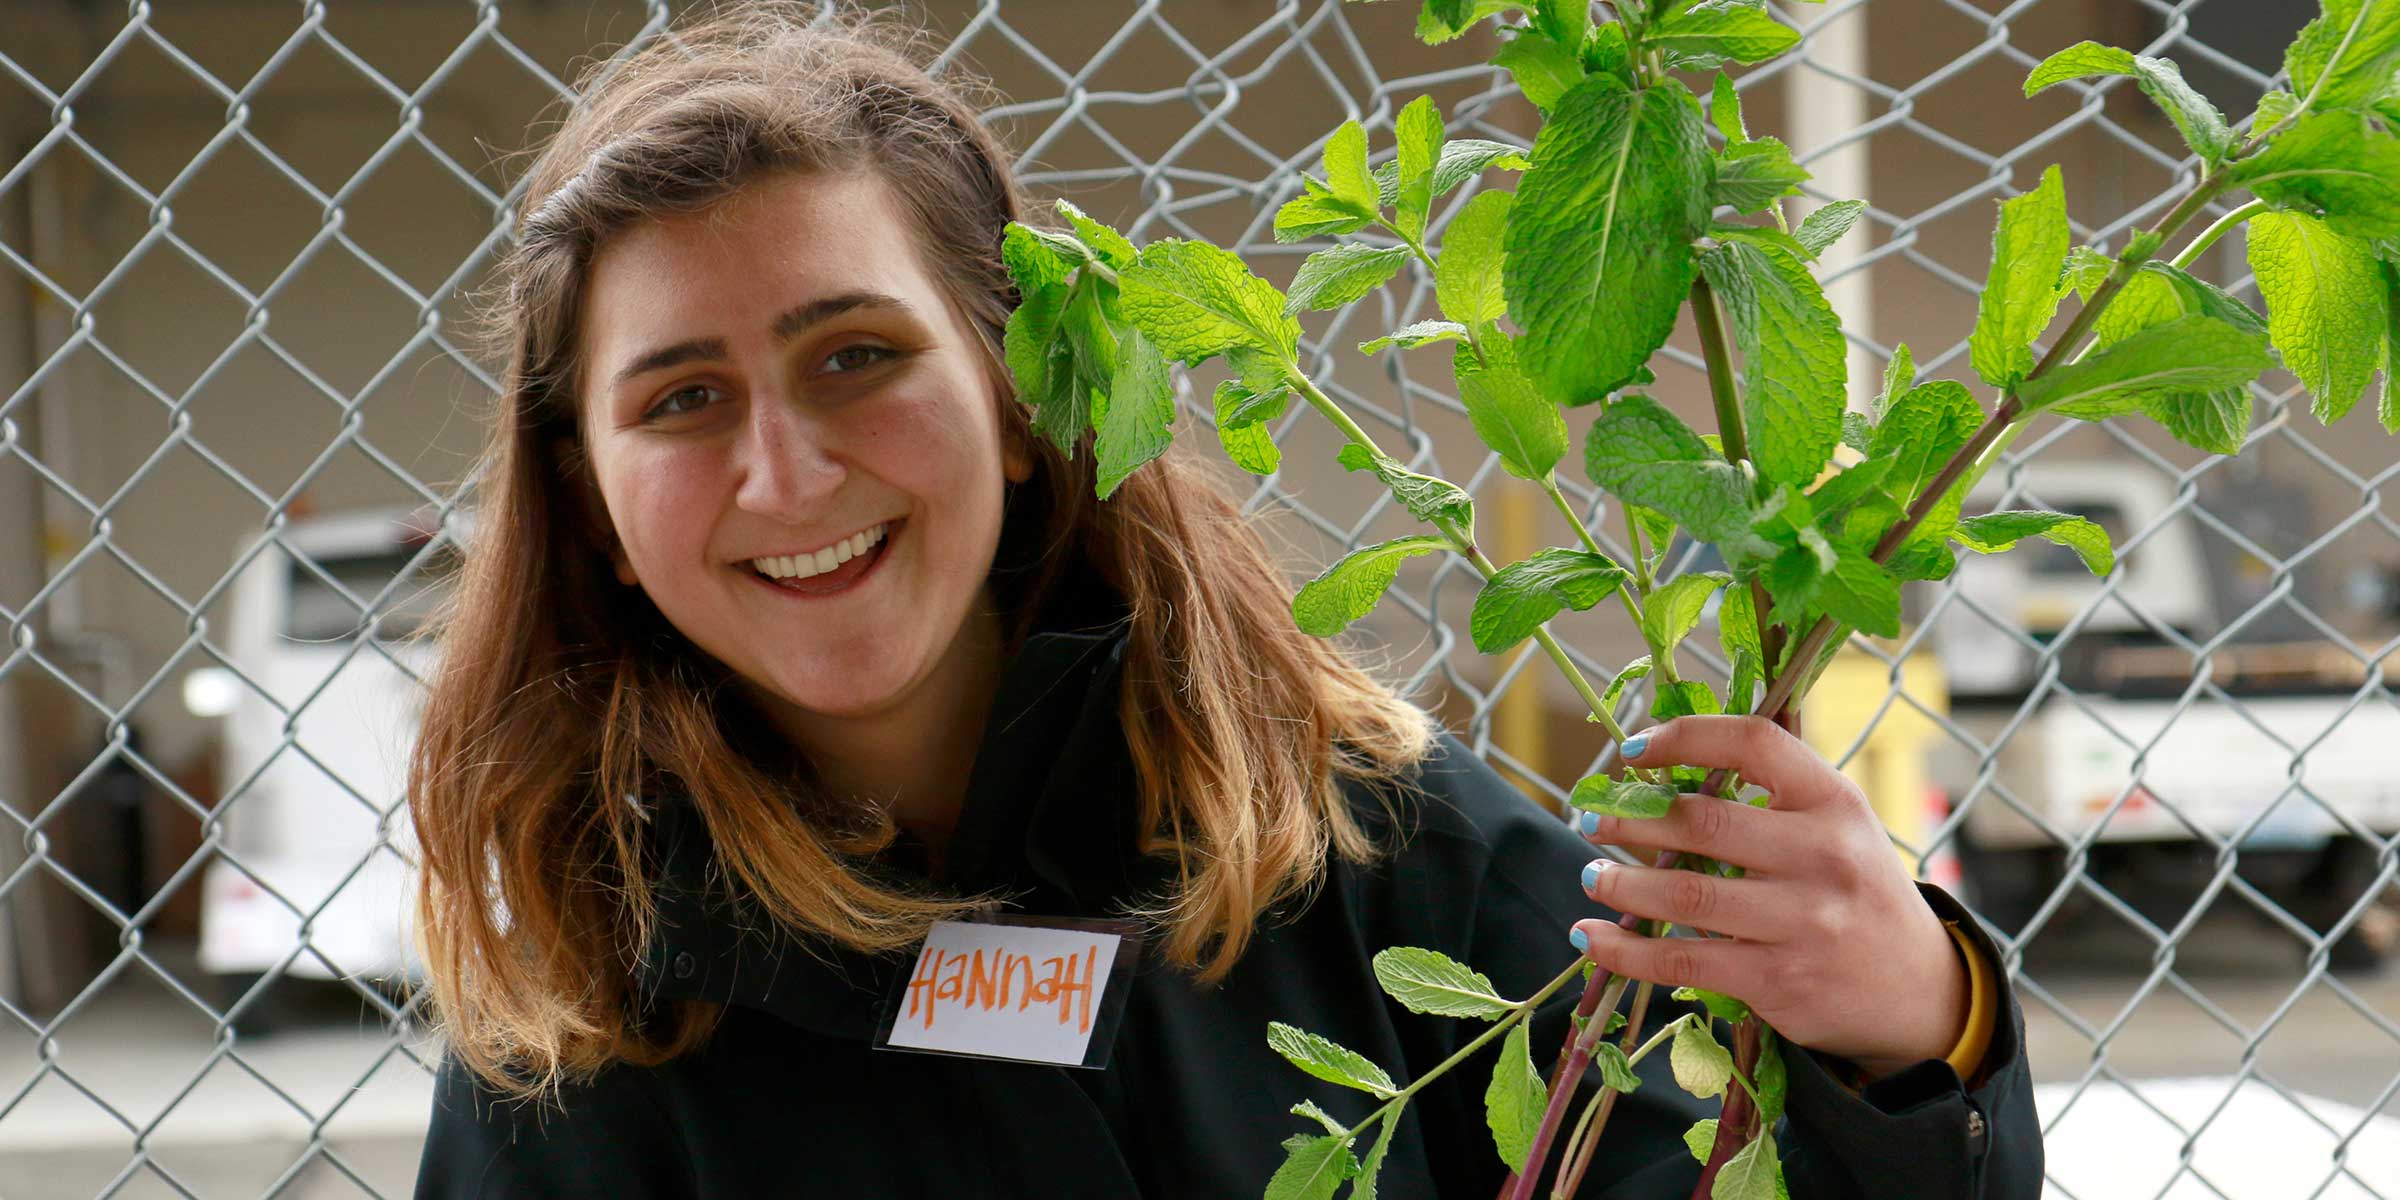 Fulbright Scholar Hannah Nia at the Earth Day Plant Sale